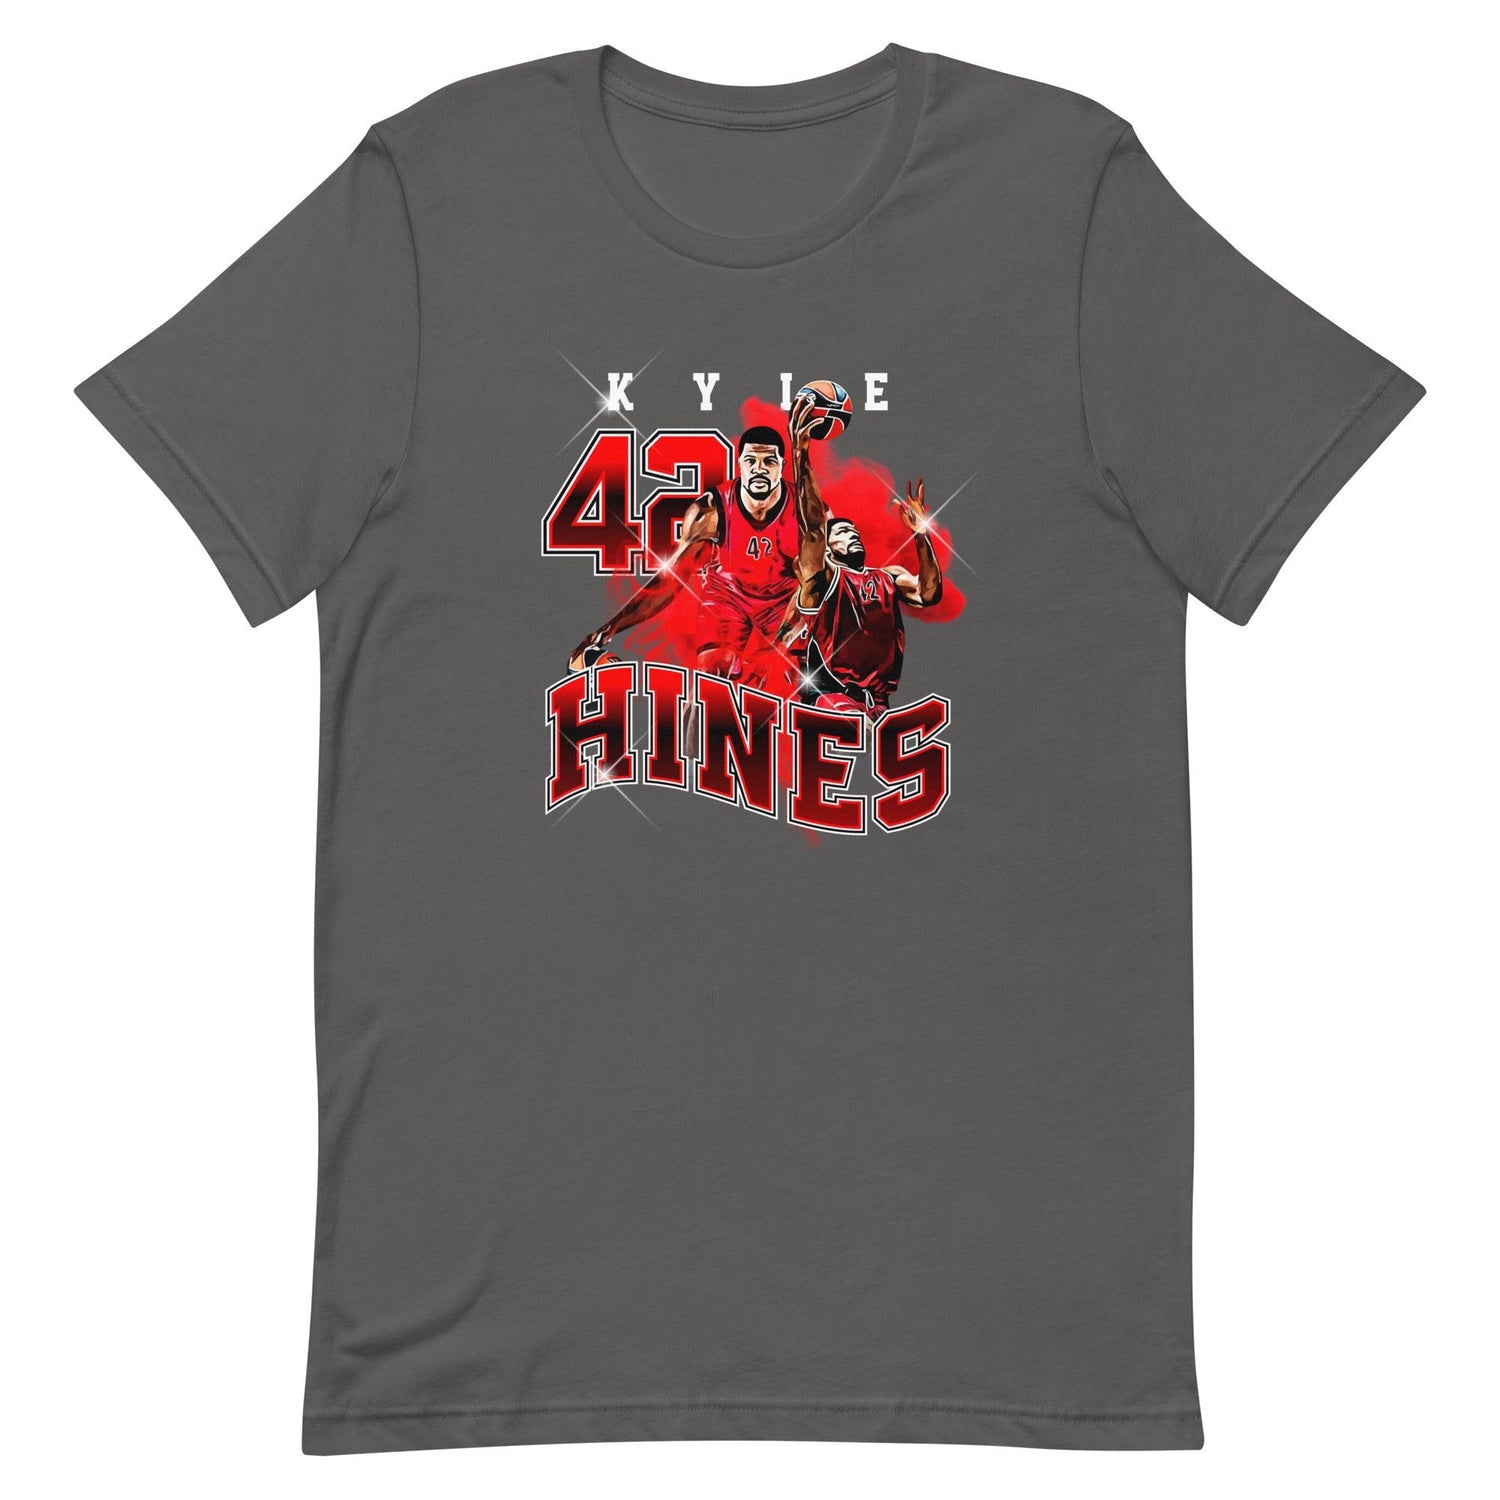 Kyle Hines "Career" t-shirt - Fan Arch